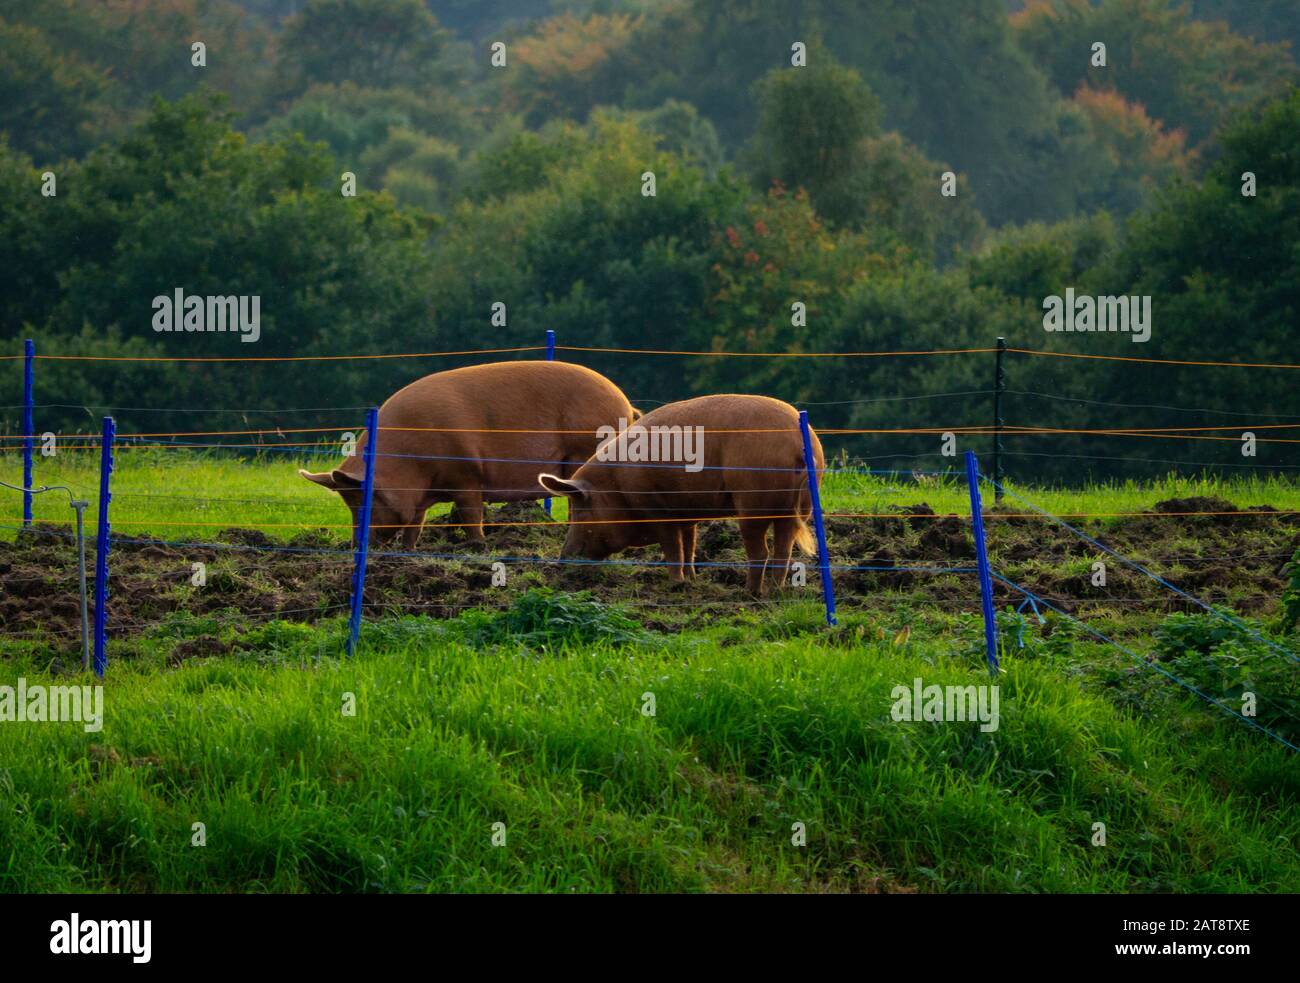 Pair of brown pigs on a farm in the Scottish Highlands Inverness-shire Scotland UK Stock Photo